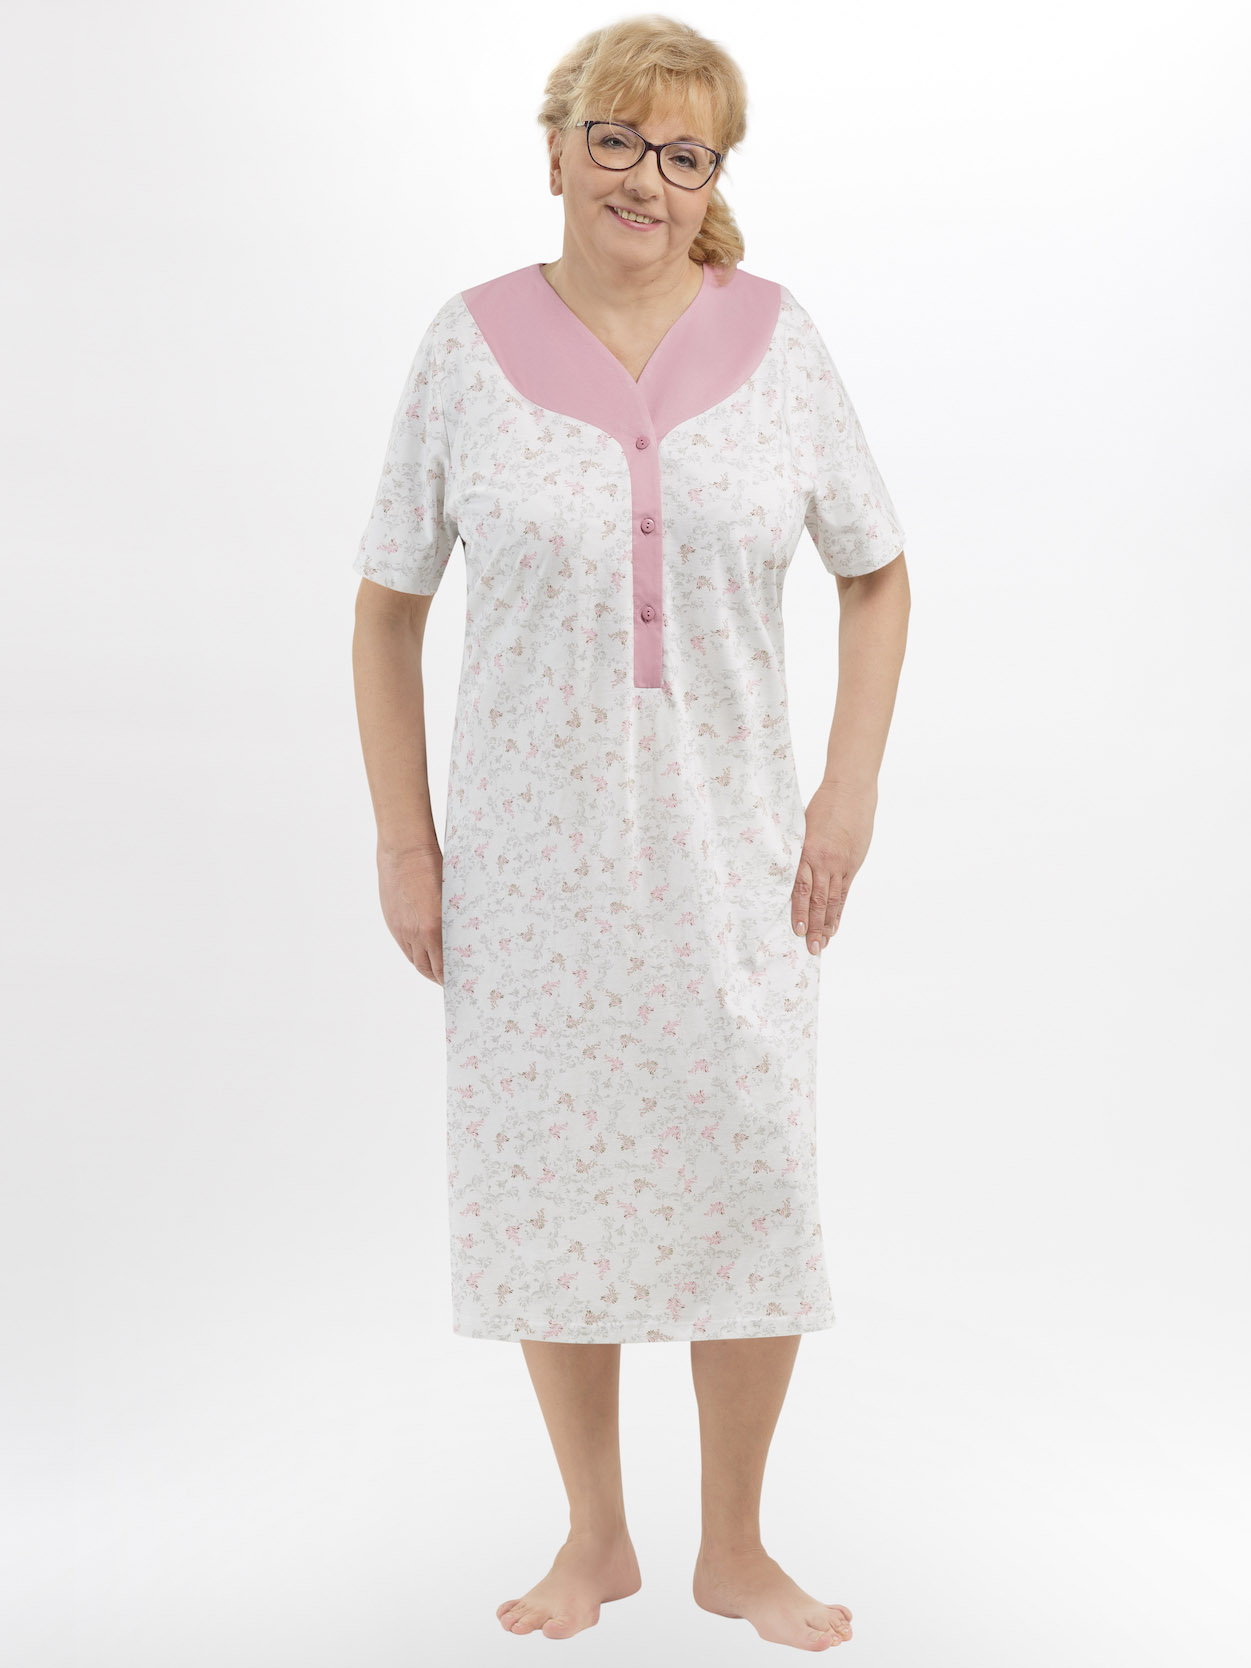 Women's nightgown with a contrasting neckline Martel 209 Halina